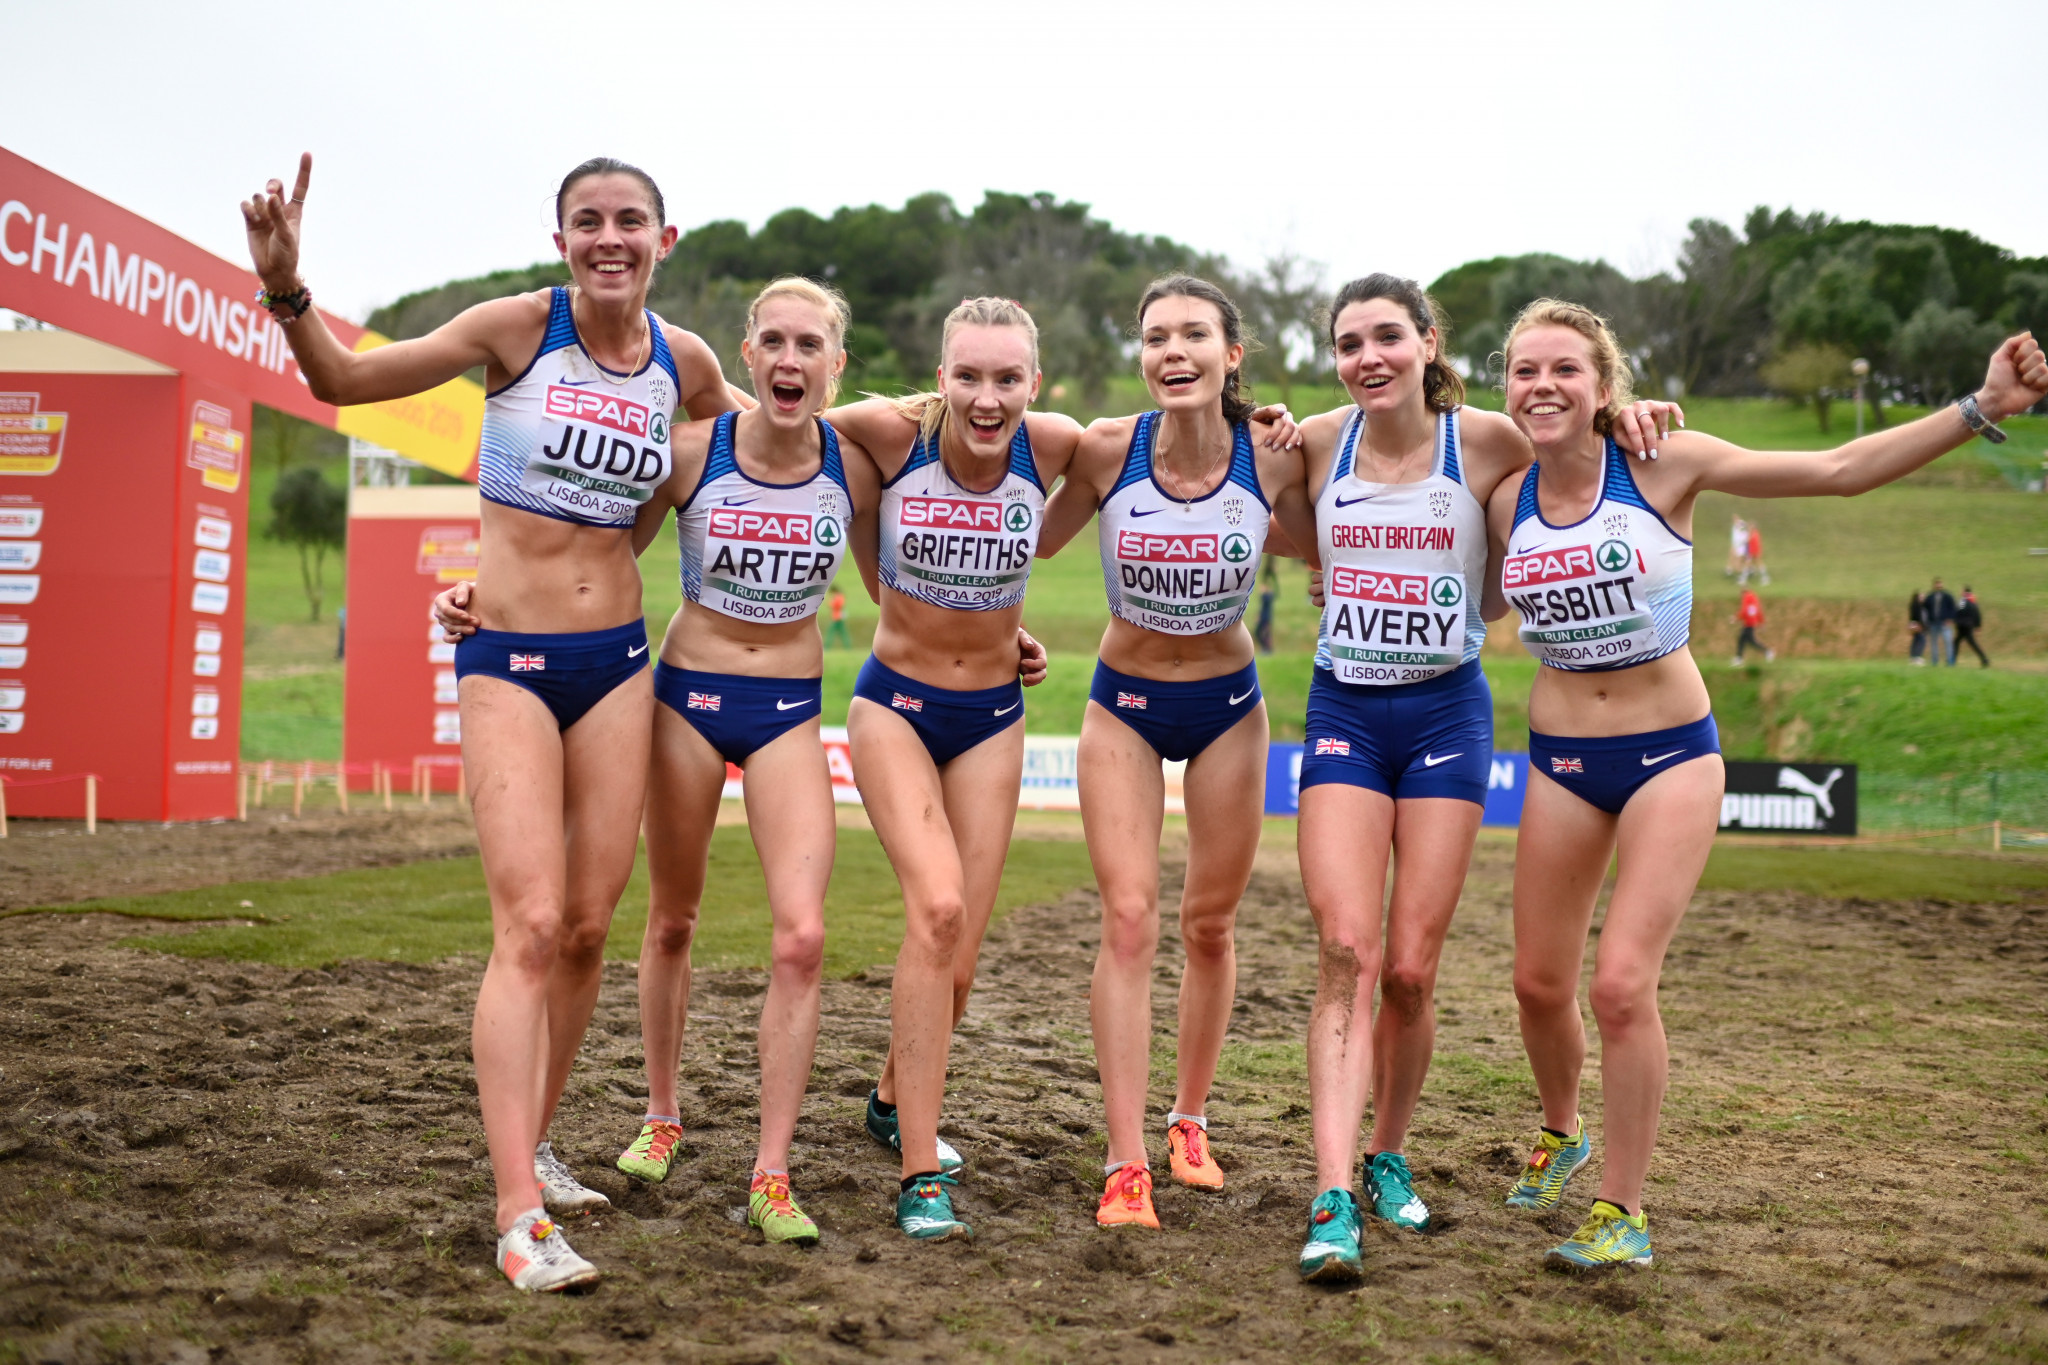 British athletes dominate the start lists at the opening World Athletics Cross Country Tour event of the season, with Charlotte Arter, second left, Kate Avery, second right, and Jenny Nesbitt, far right, all expected to vie for victory ©Getty Images